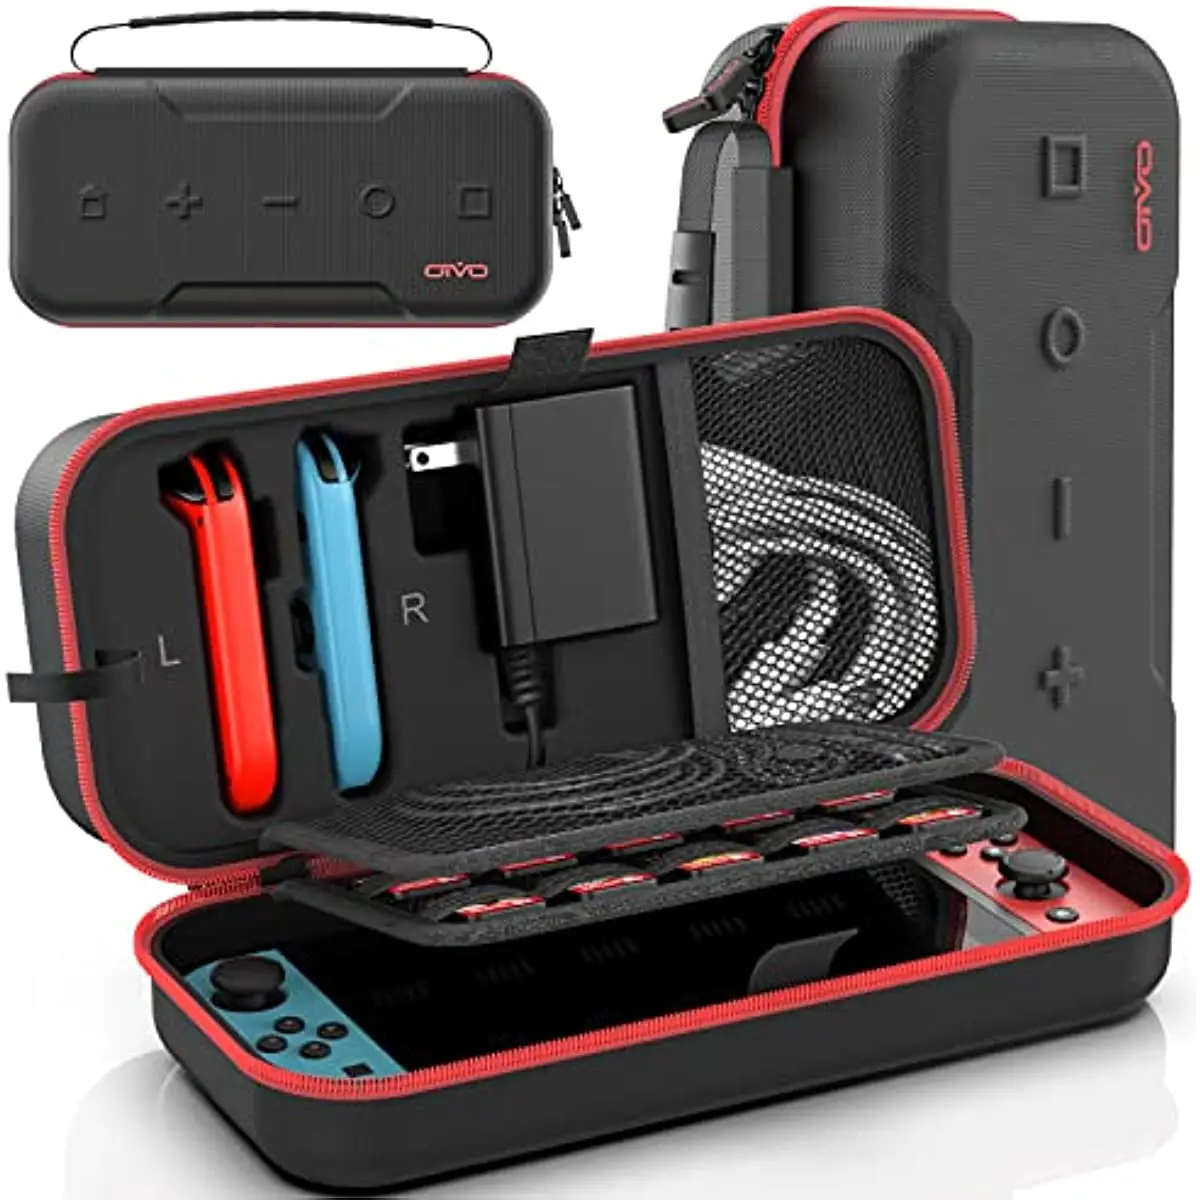 

Portable Switch Travel Carry Case Fit for Nintend Switch/OLED Model JoyPad and Adapter, Hard Shell Protective